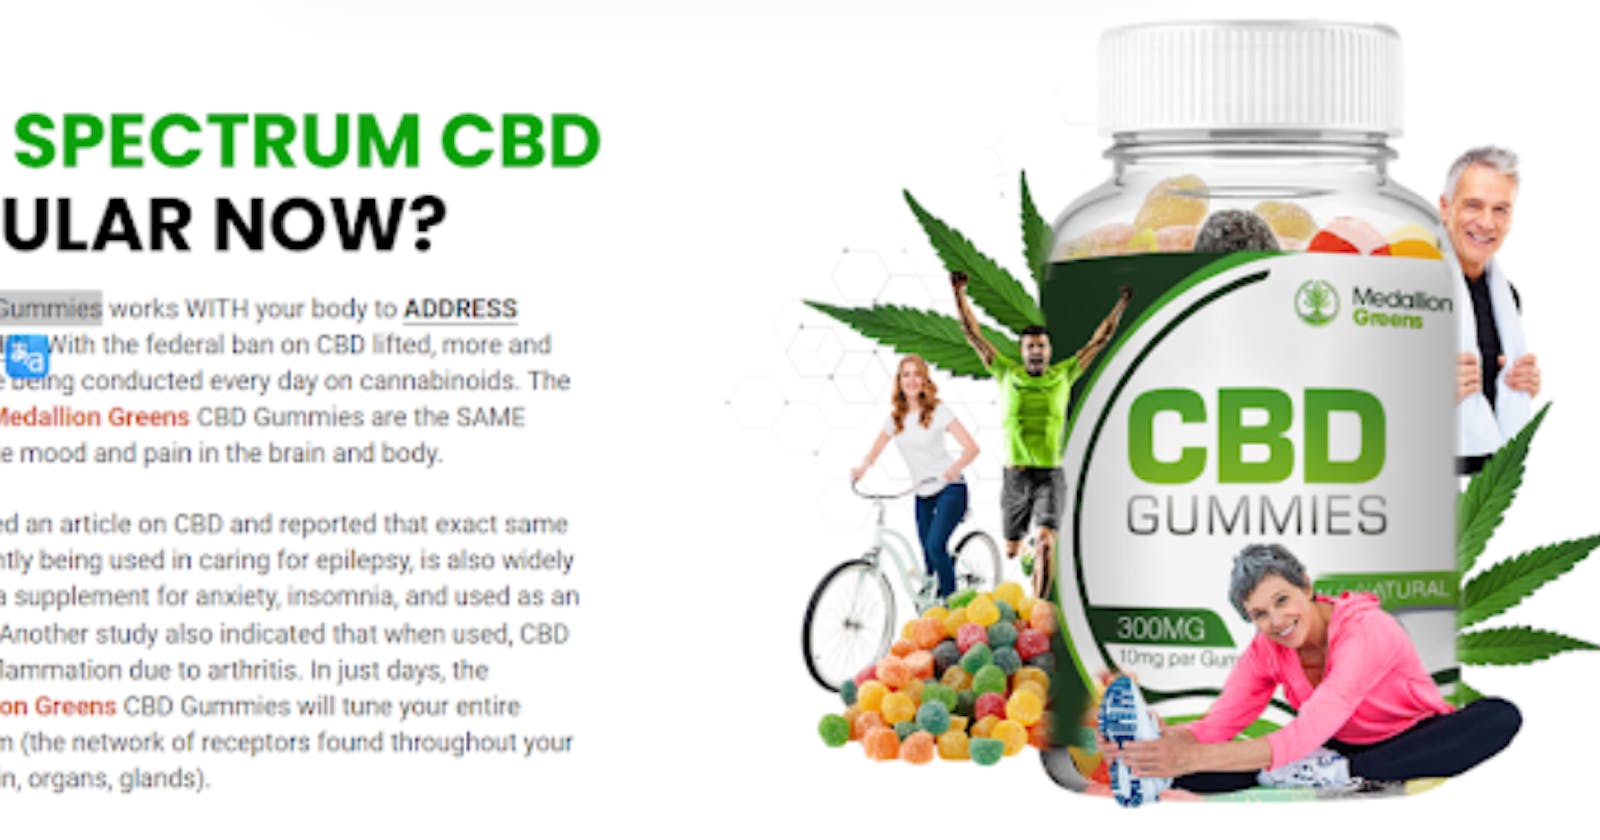 Where To Buy Medallion Greens CBD Gummies Official Website In USA?